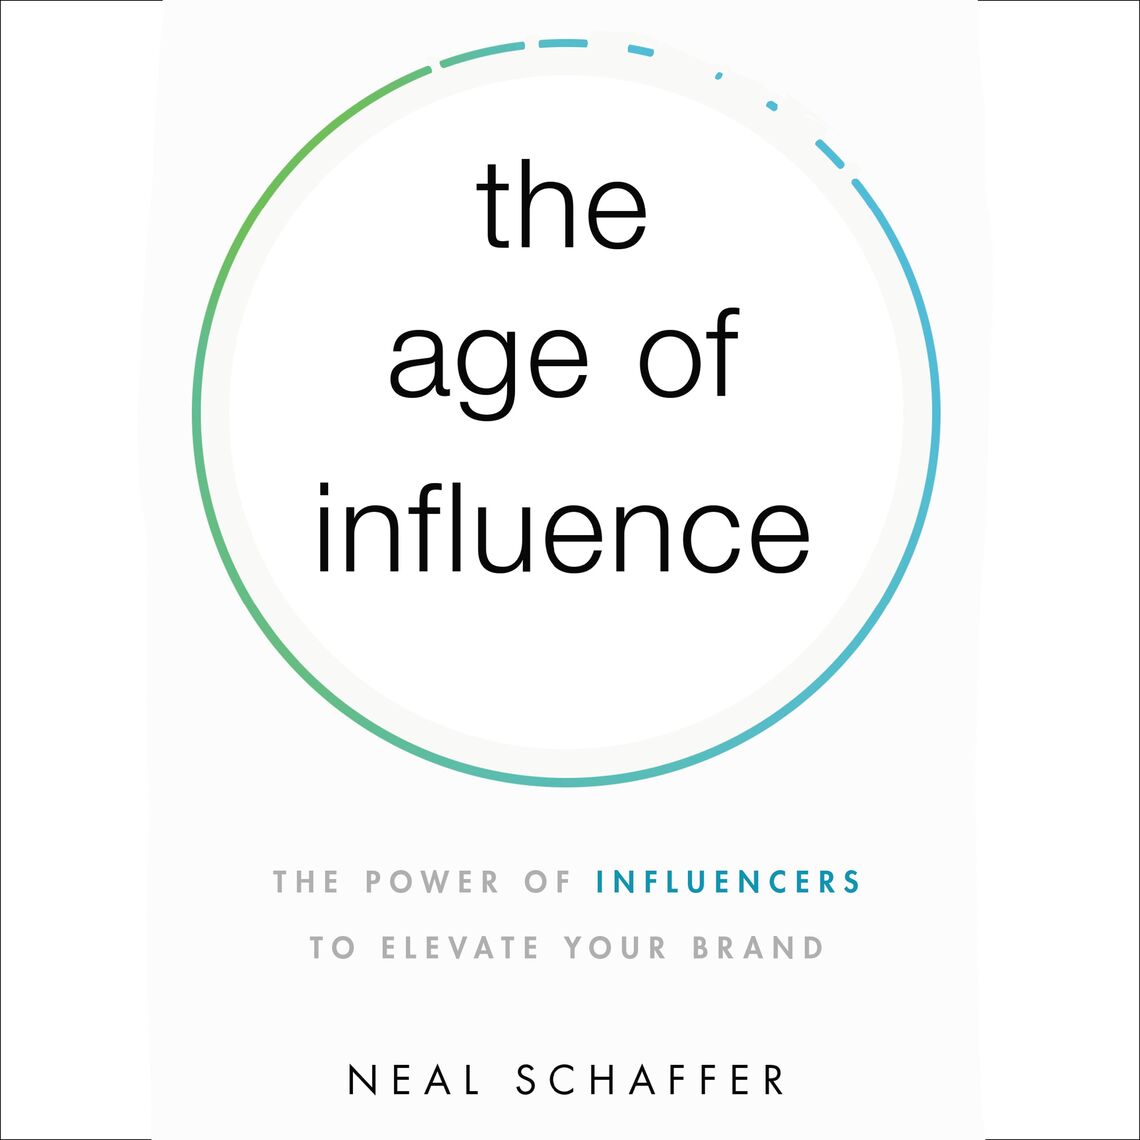 Schaffer　of　Age　The　Influence　Audiobook　by　Neal　Scribd